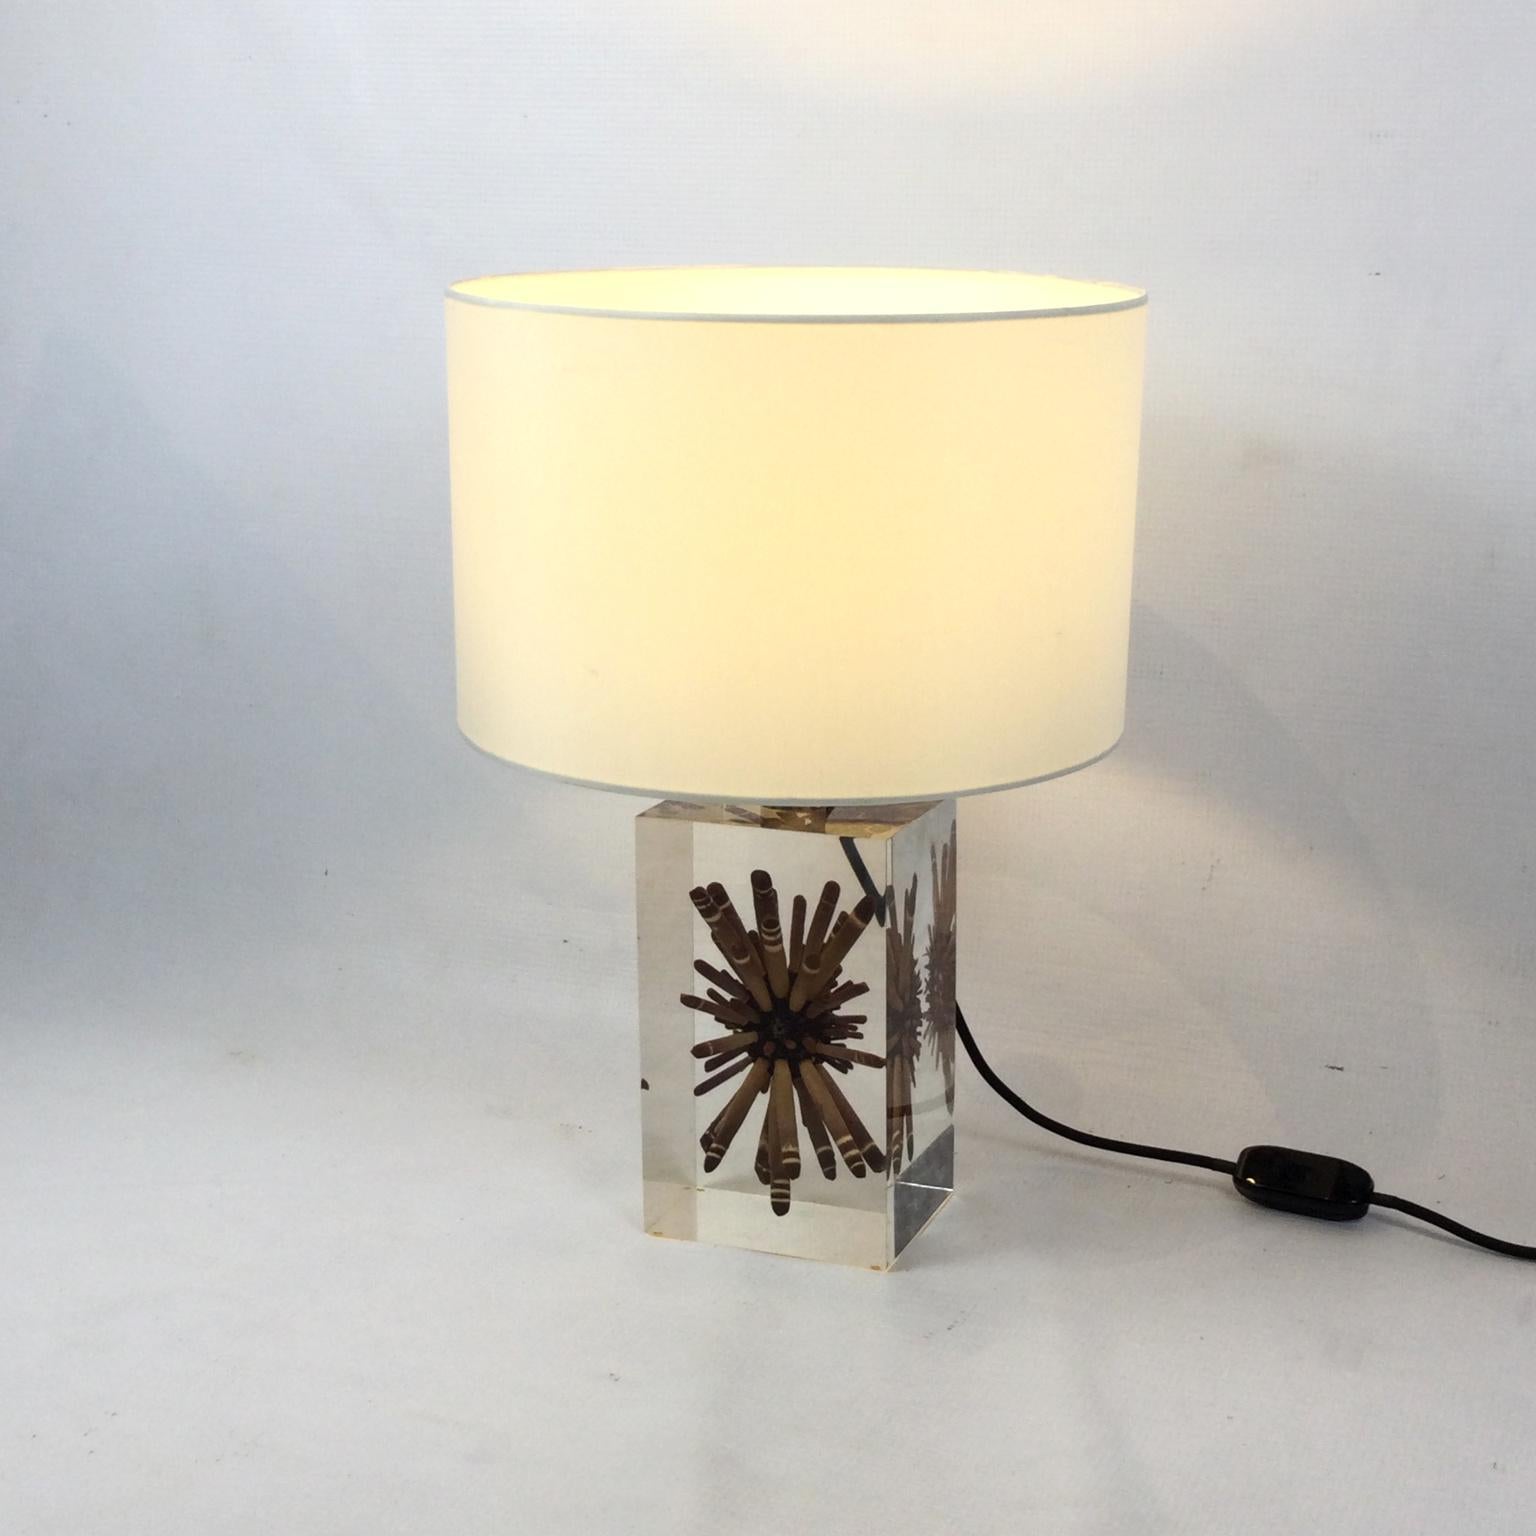 Other Pierre Giraudon 1970s Large Resin Table Lamp with Tropical Ursin Inclusion For Sale